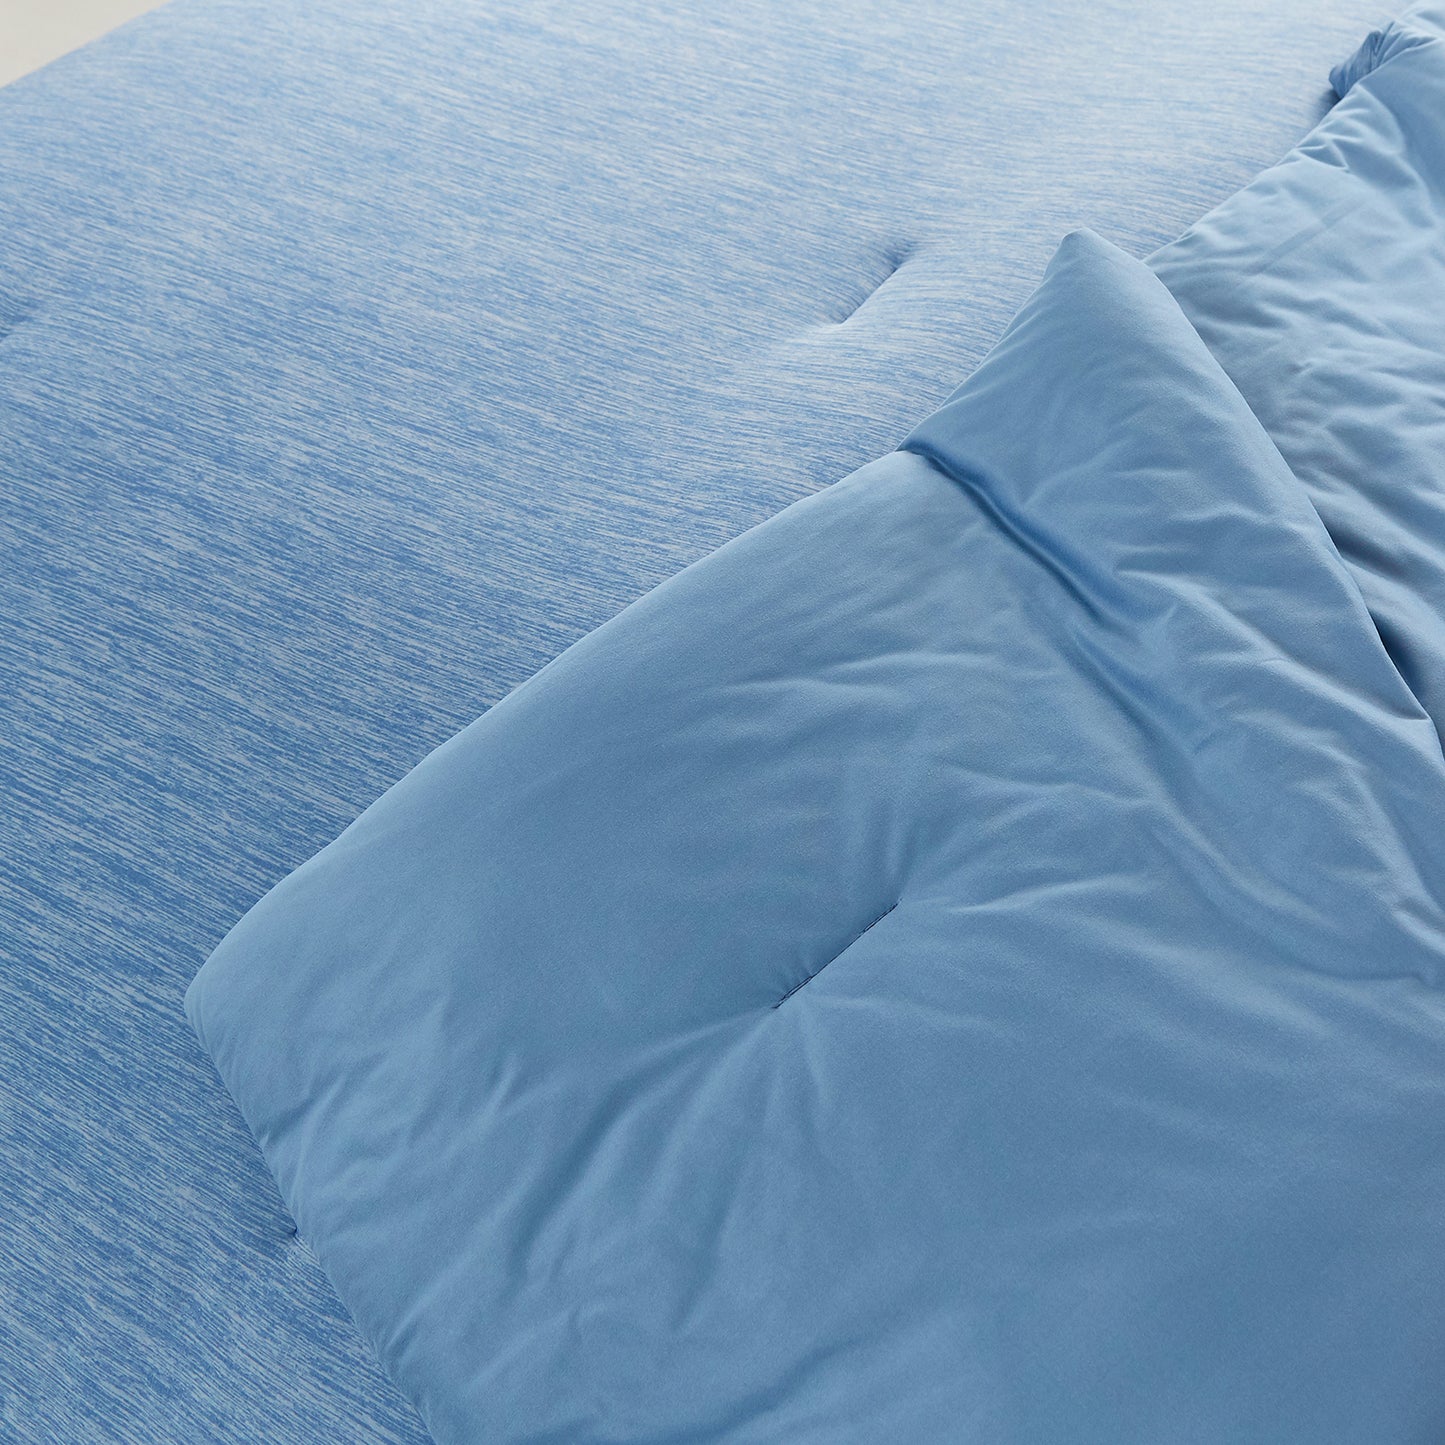 WONGS BEDDING Smooth, Comfortable and Cooling Duvet Cover-Blue